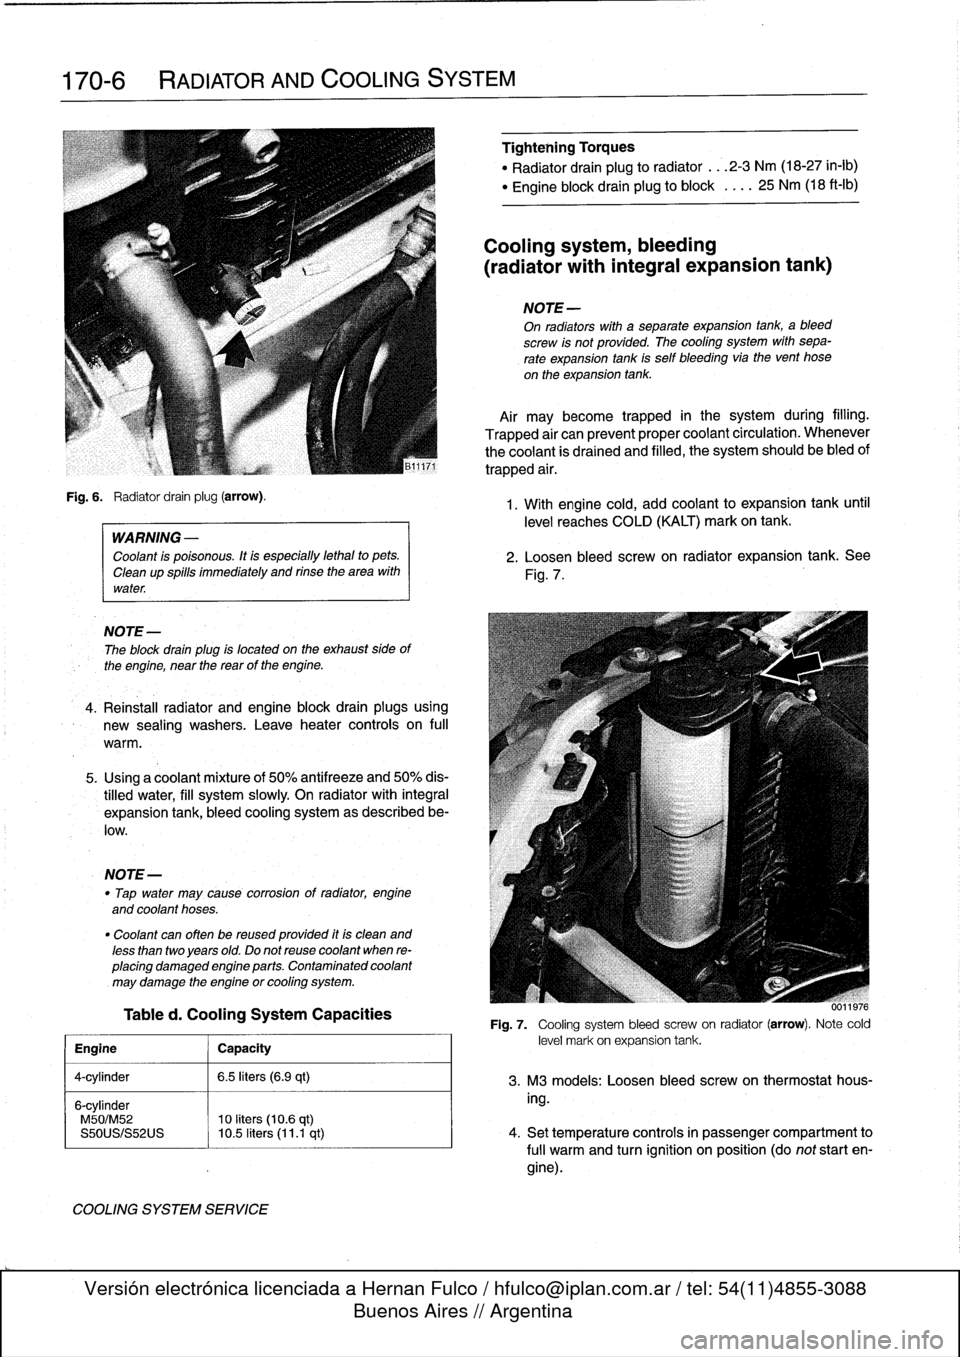 BMW M3 1993 E36 Workshop Manual 
170-6

	

RADIATOR
AND
COOLING
SYSTEM

Fig
.
6
.

	

Radiator
drain
plug
(arrow)
.

WARNING
-

Coolant
is
poisonous
.
Itis
especially
lethal
to
pets
.

Cleanup
spills
immediately
and
rinse
the
area
w